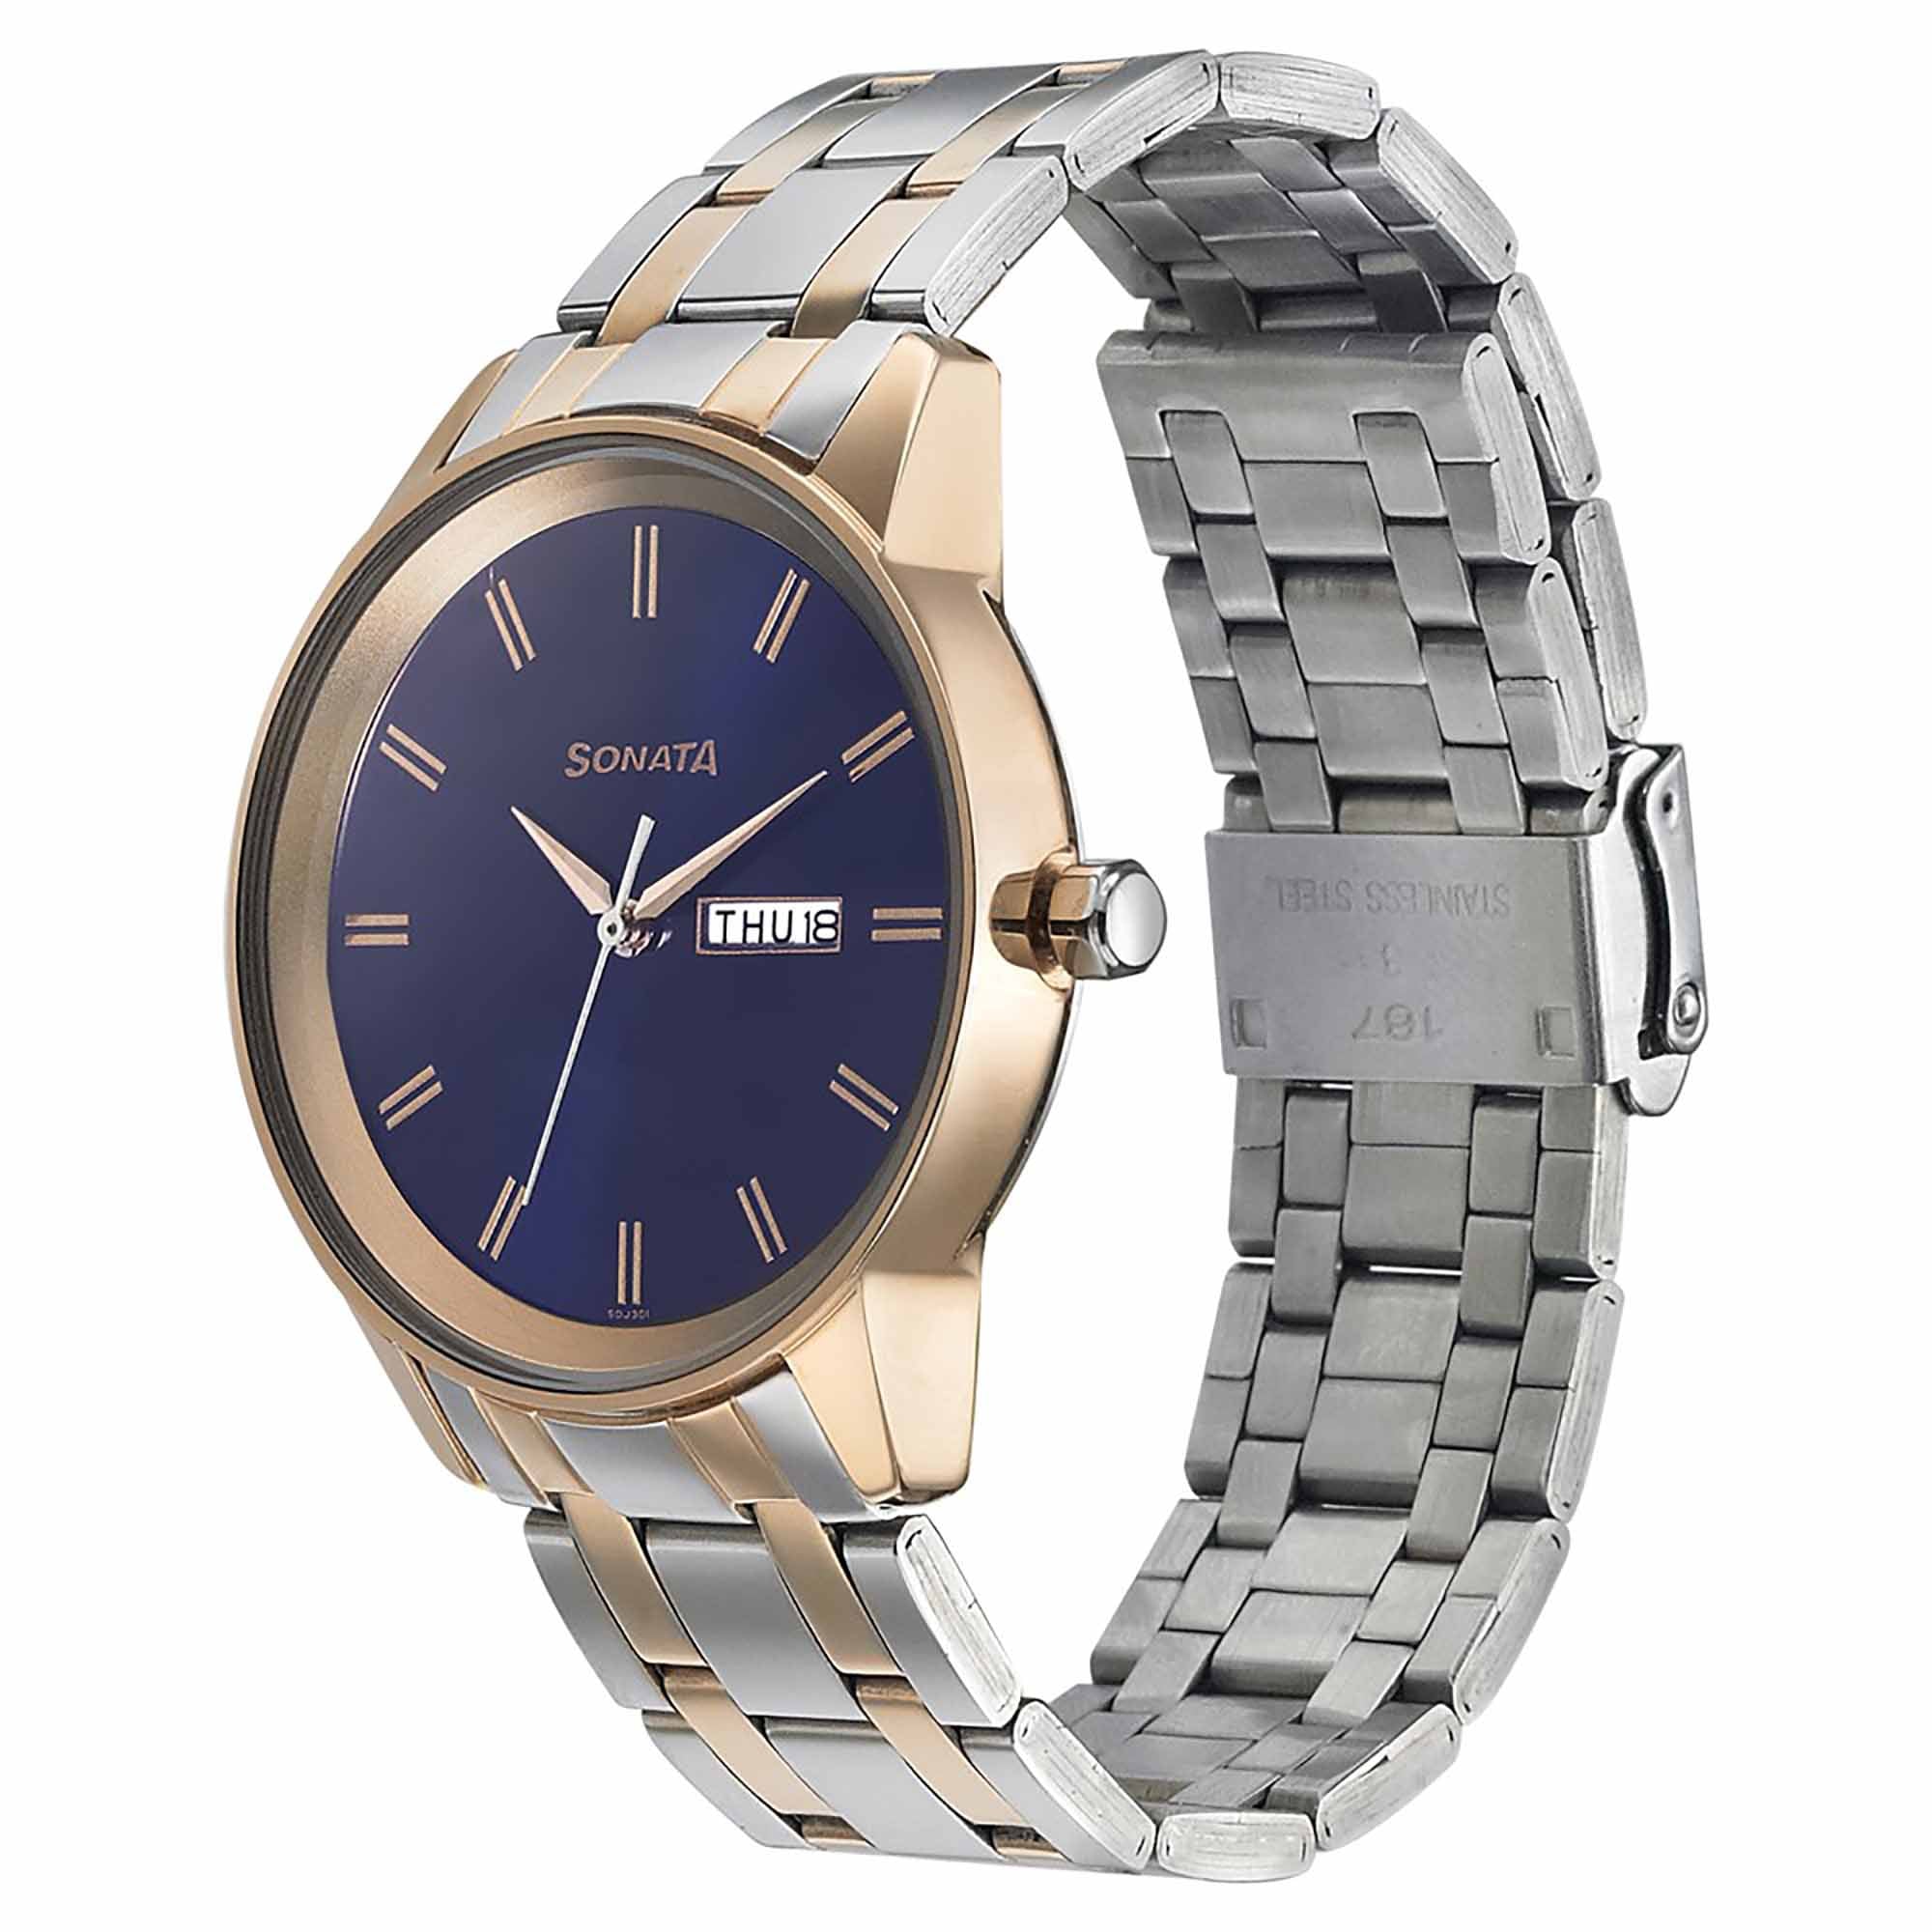 Sonata Quartz Analog with Day and Date Blue Dial Bimetal Strap Watch for Men